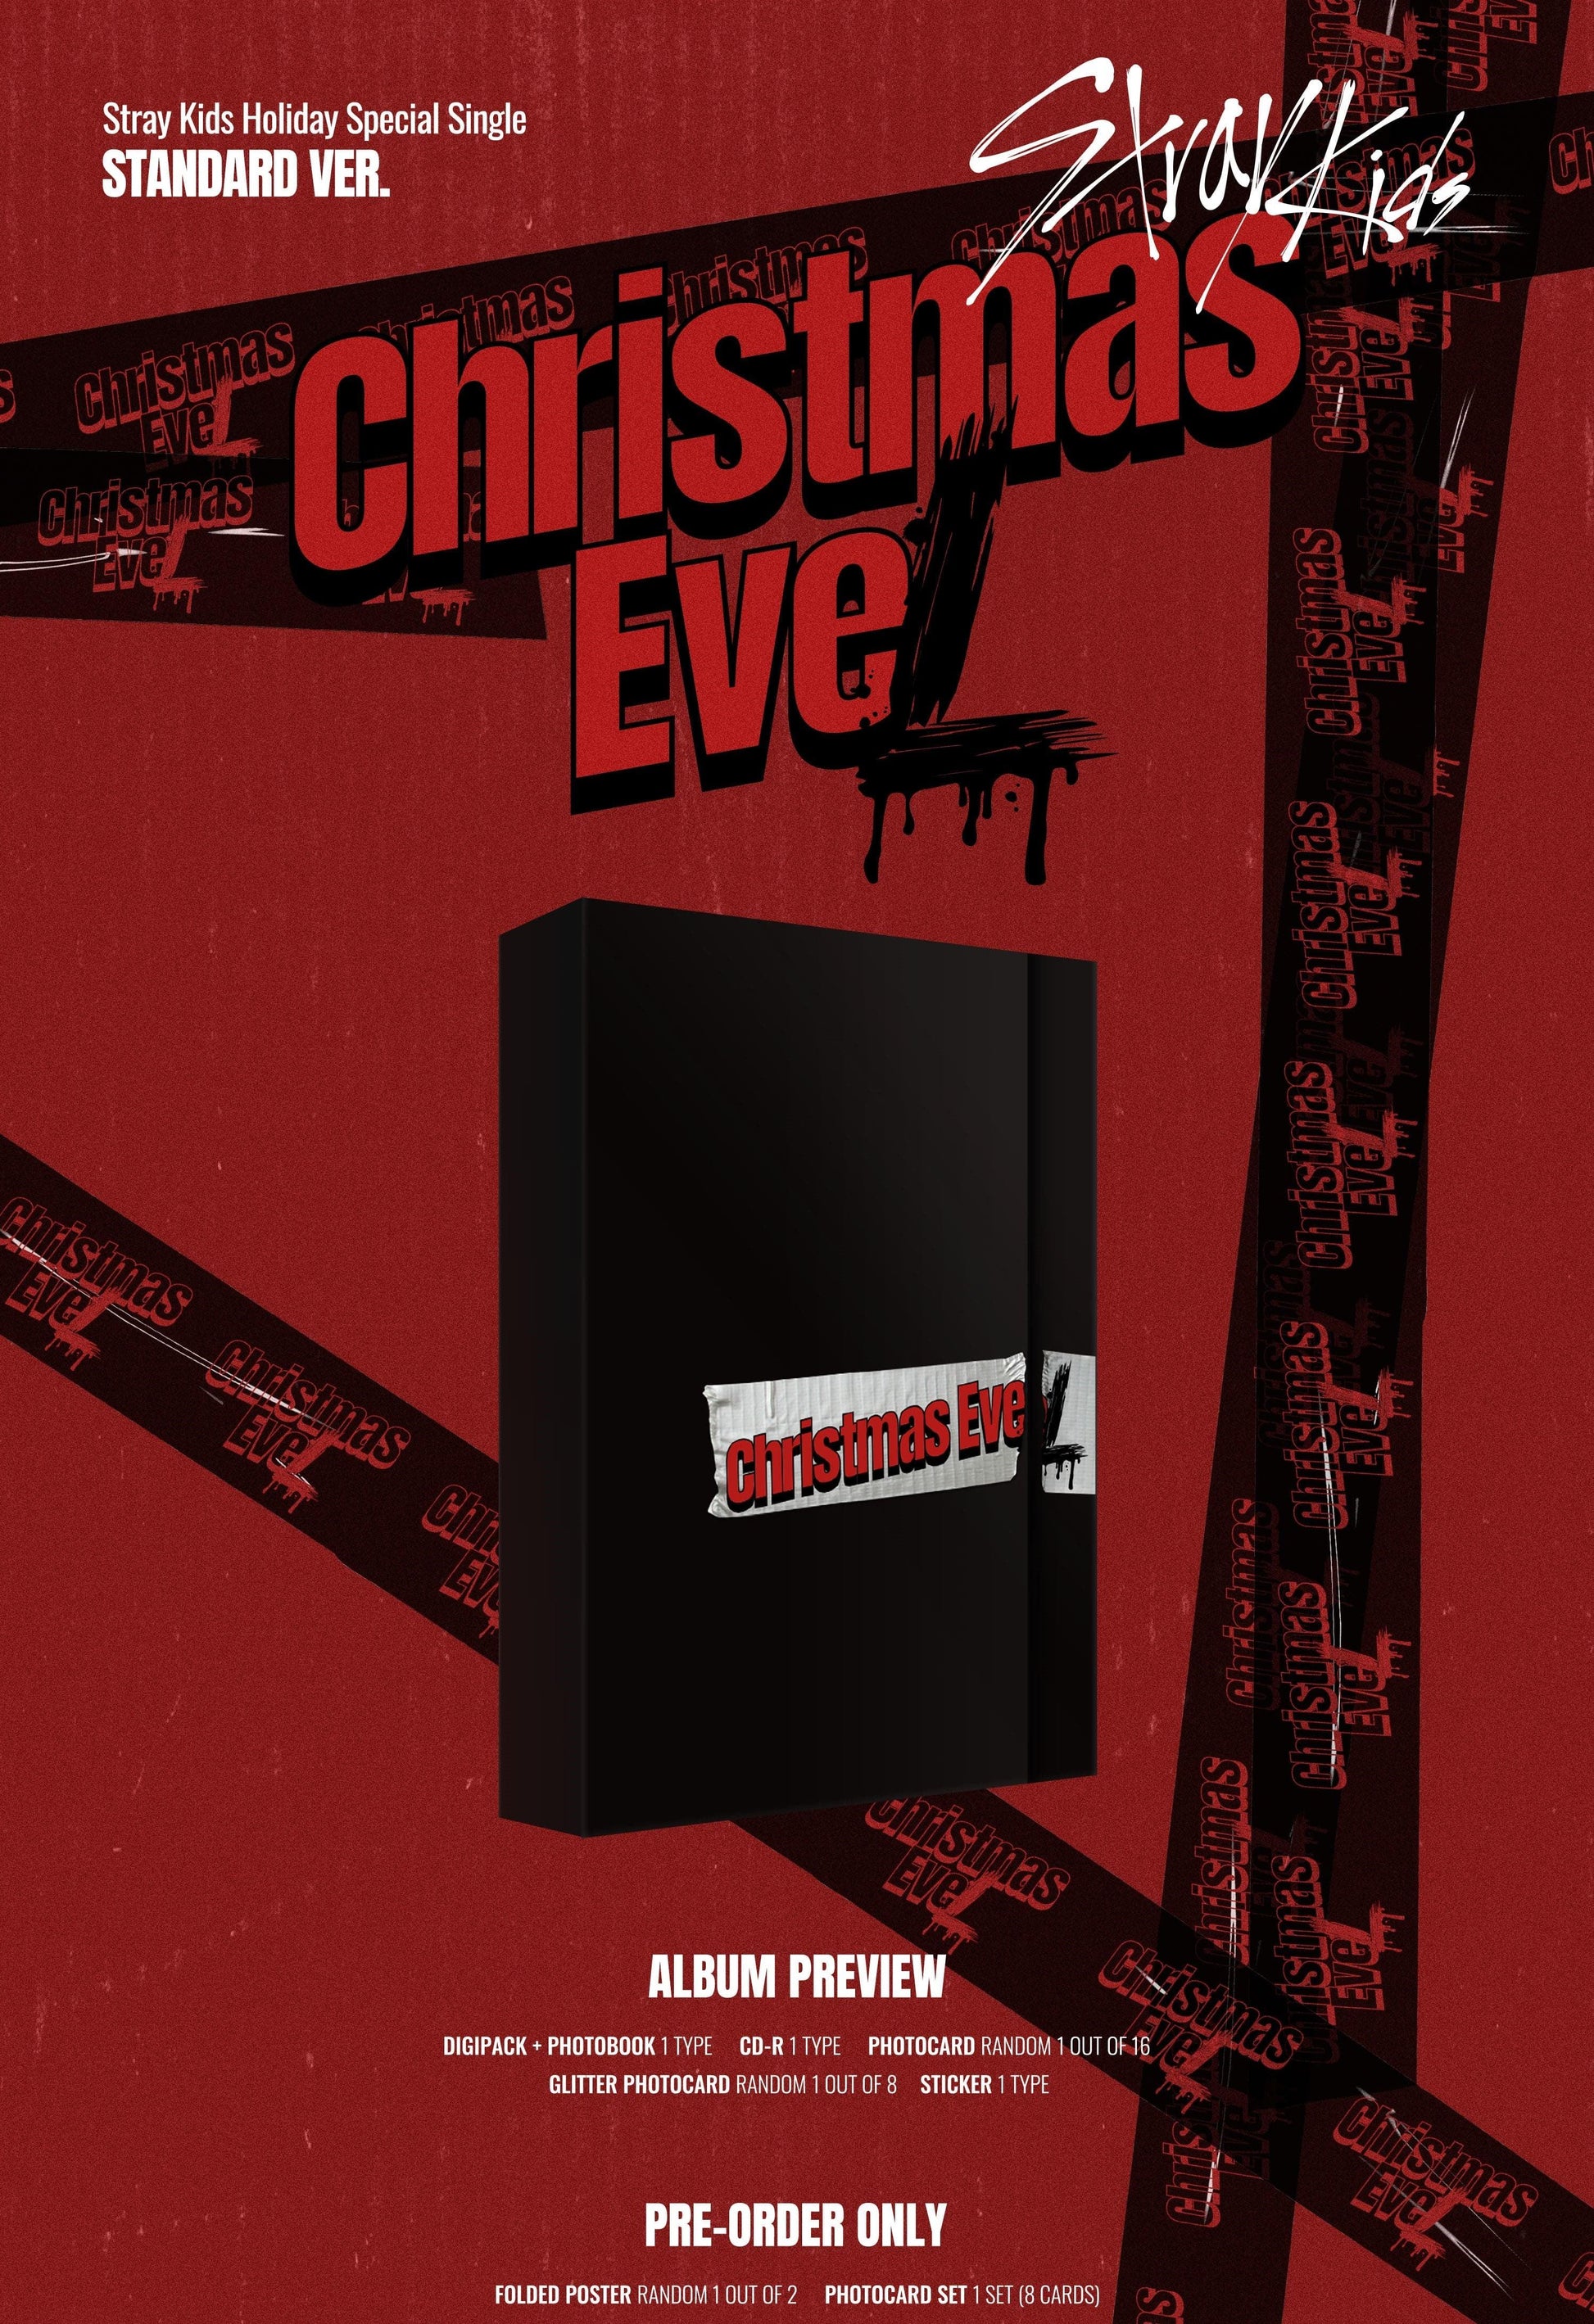 STRAY KIDS - HOLIDAY SPECIAL SINGLE 'CHRISTMAS EveL' (STANDARD VER) - J-Store Online